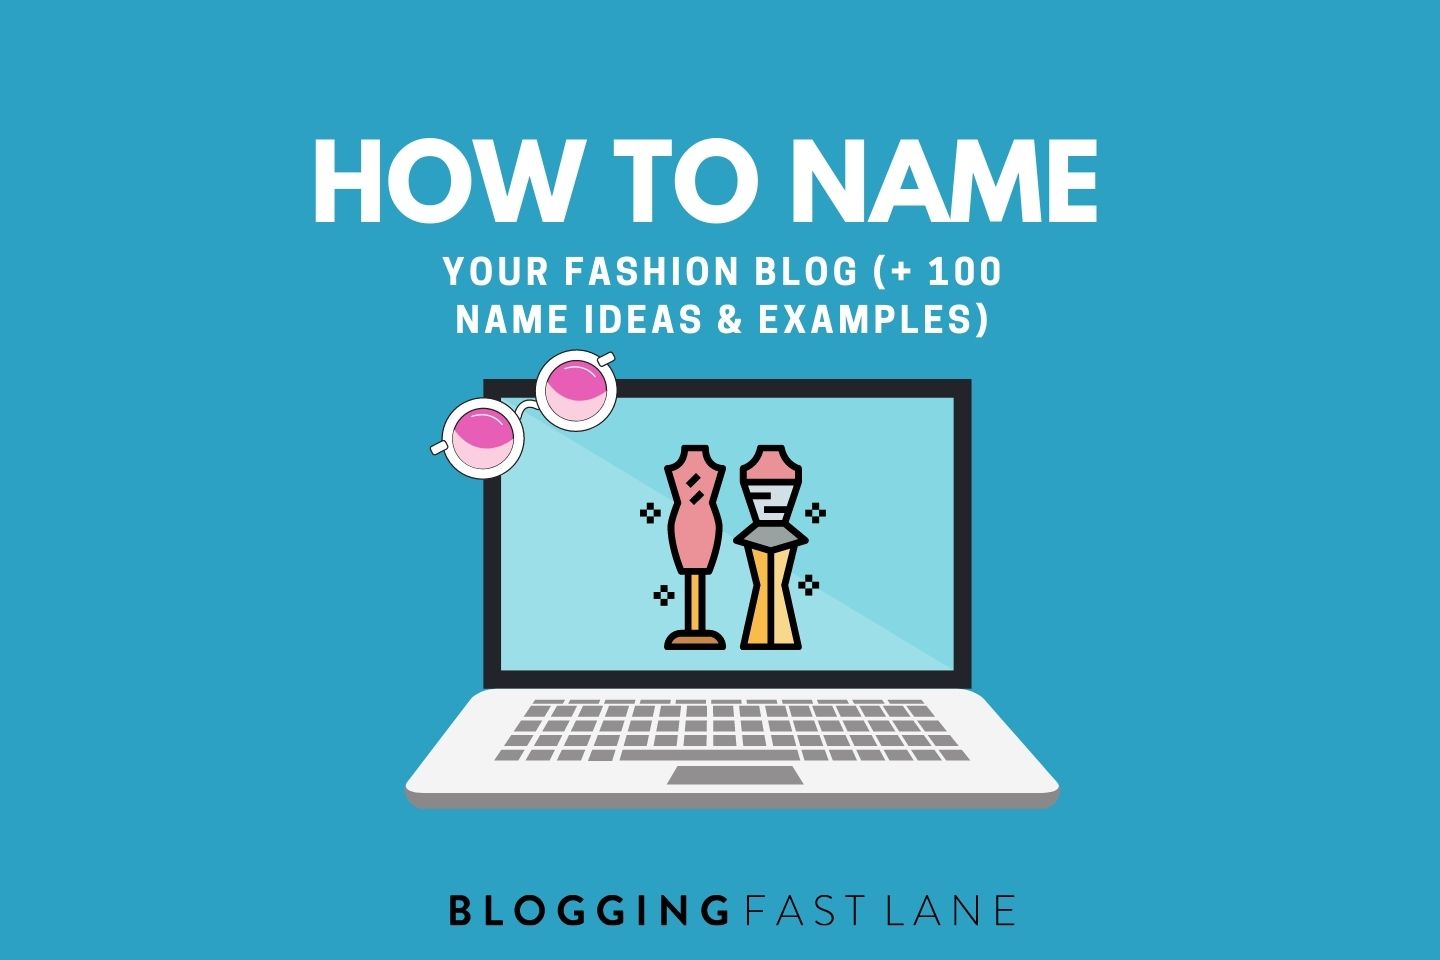 DELA DISCOUNT Blogging-15 How to Name Your Fashion Blog (+ 100 Name Ideas & Examples) DELA DISCOUNT  